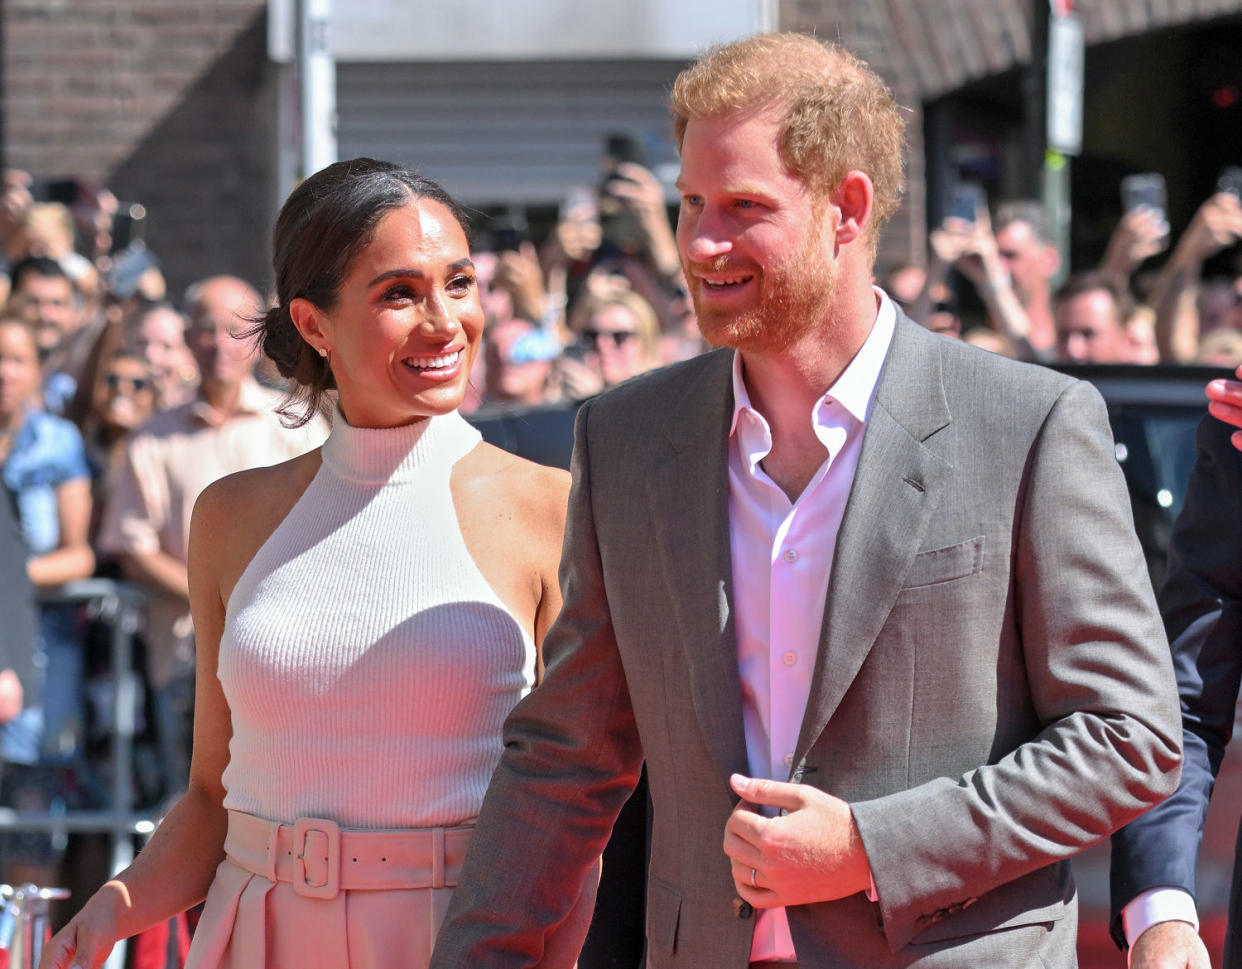 Prince Harry, Duke of Sussex and Meghan, Duchess of Sussex. (Karwai Tang / WireImage)